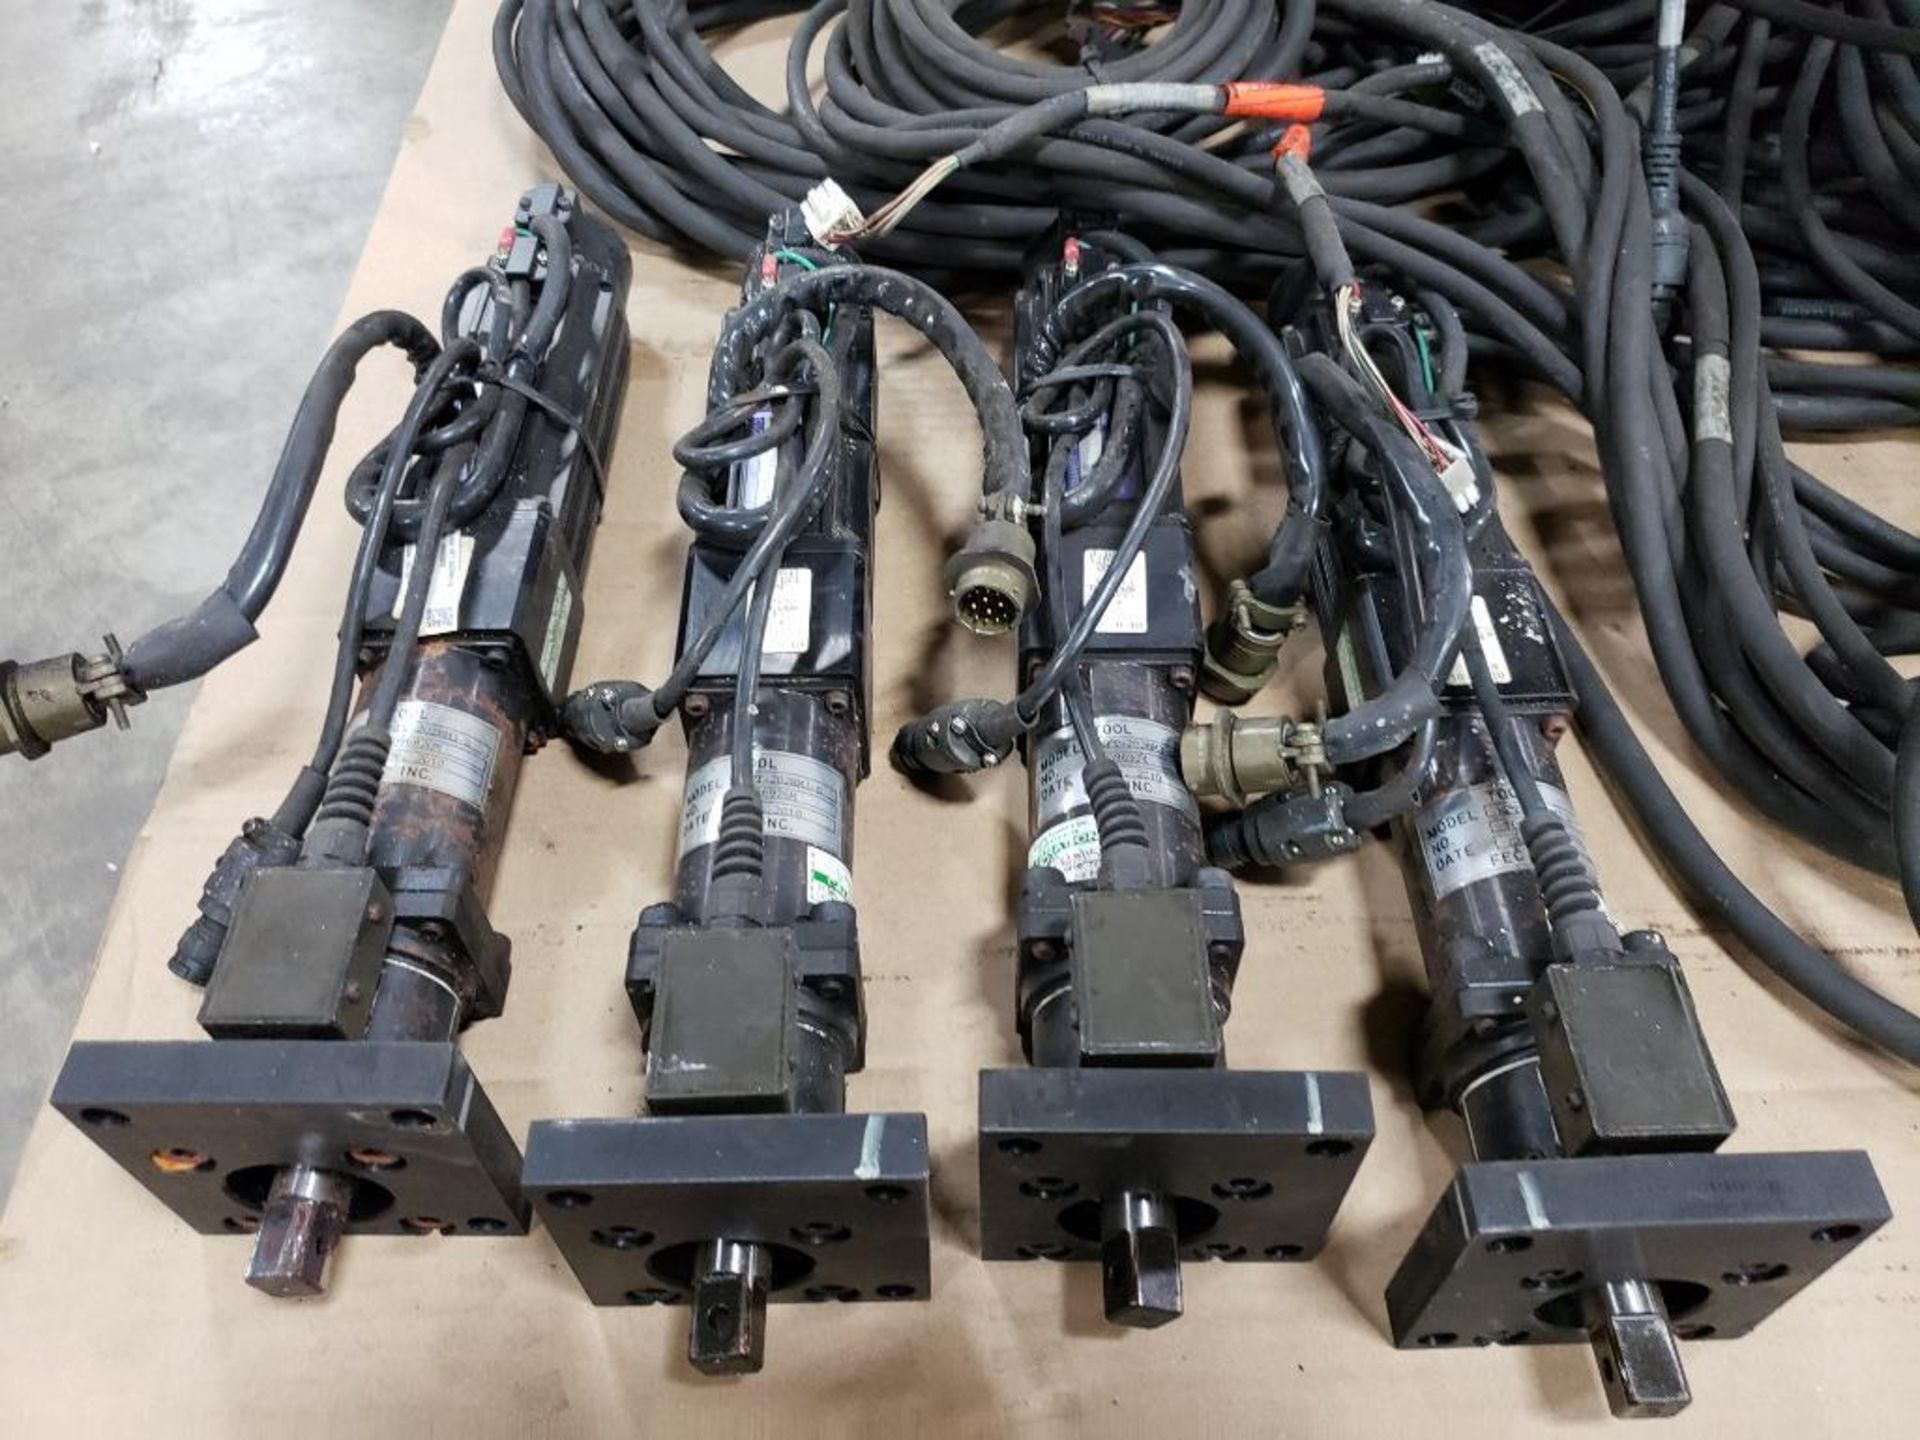 Qty 4 - FEC motorized nut runners NFT-202RM3-S and connection cords. 0.64Nm-Torque. - Image 4 of 24